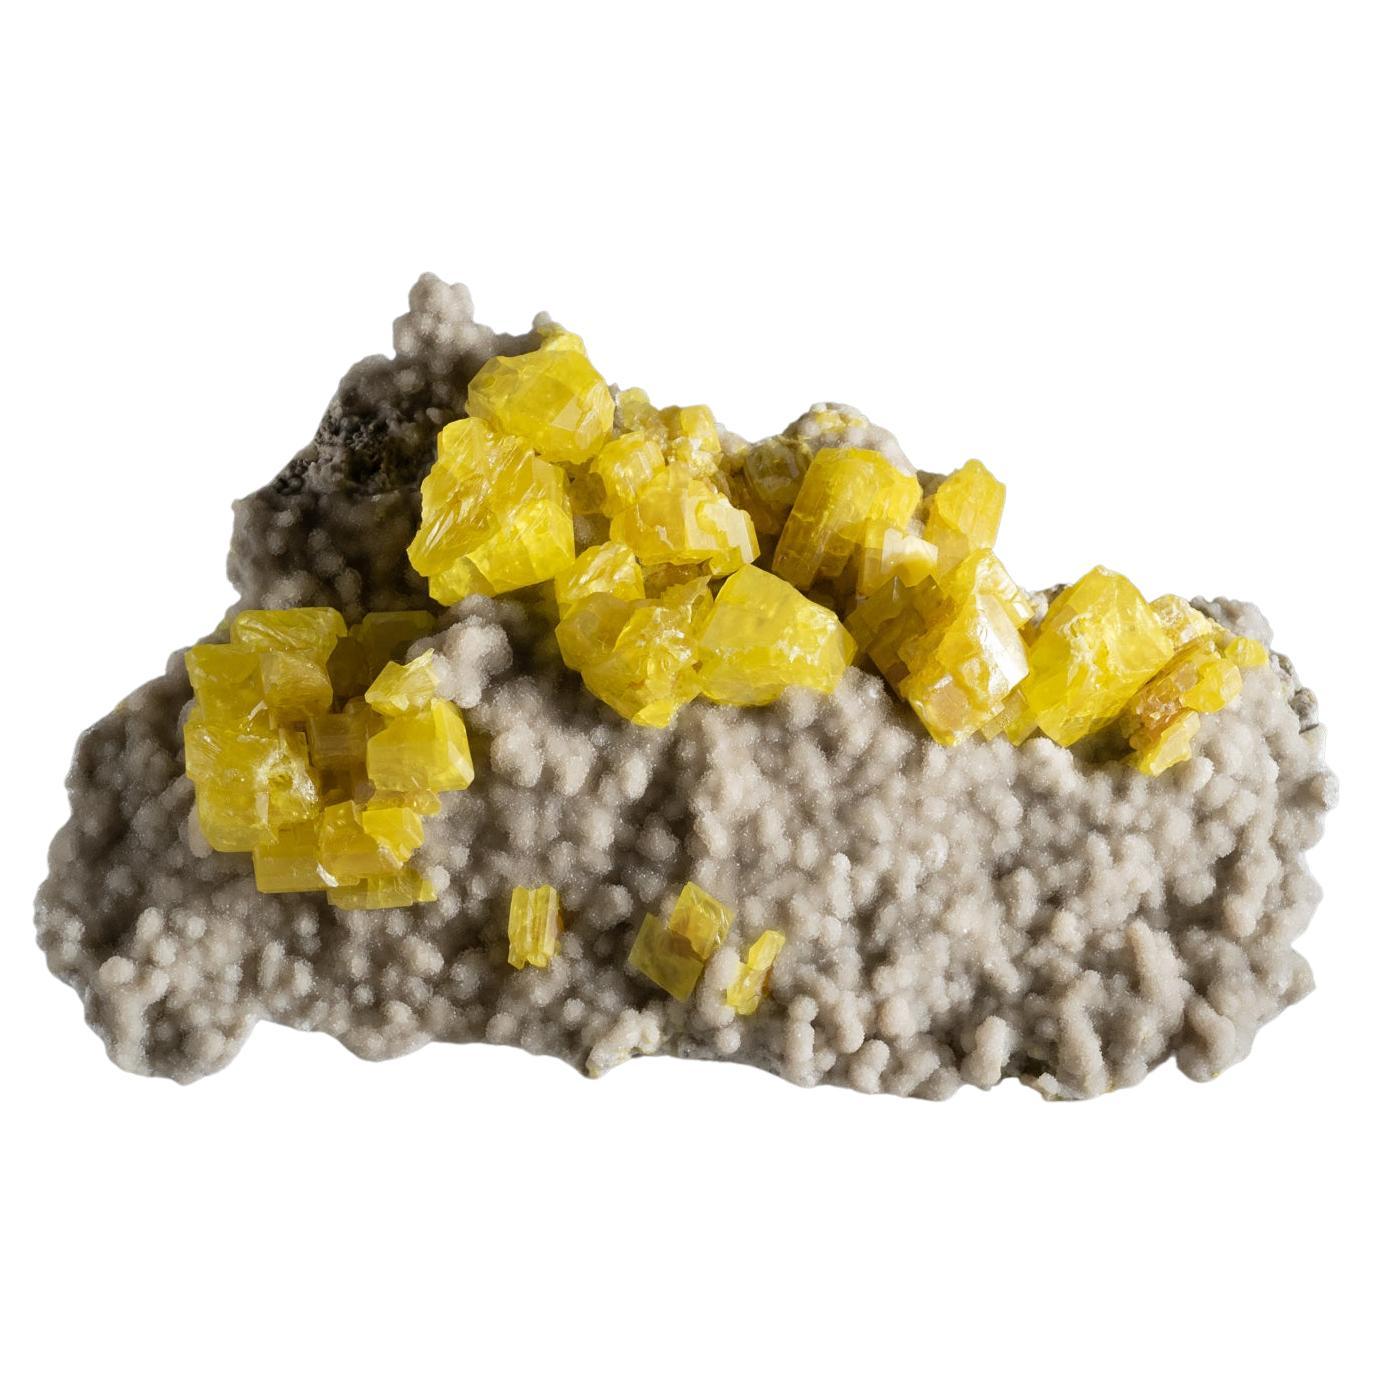 Sulfur on Aragonite Mineral from Agrigento Province, Sicily, Italy